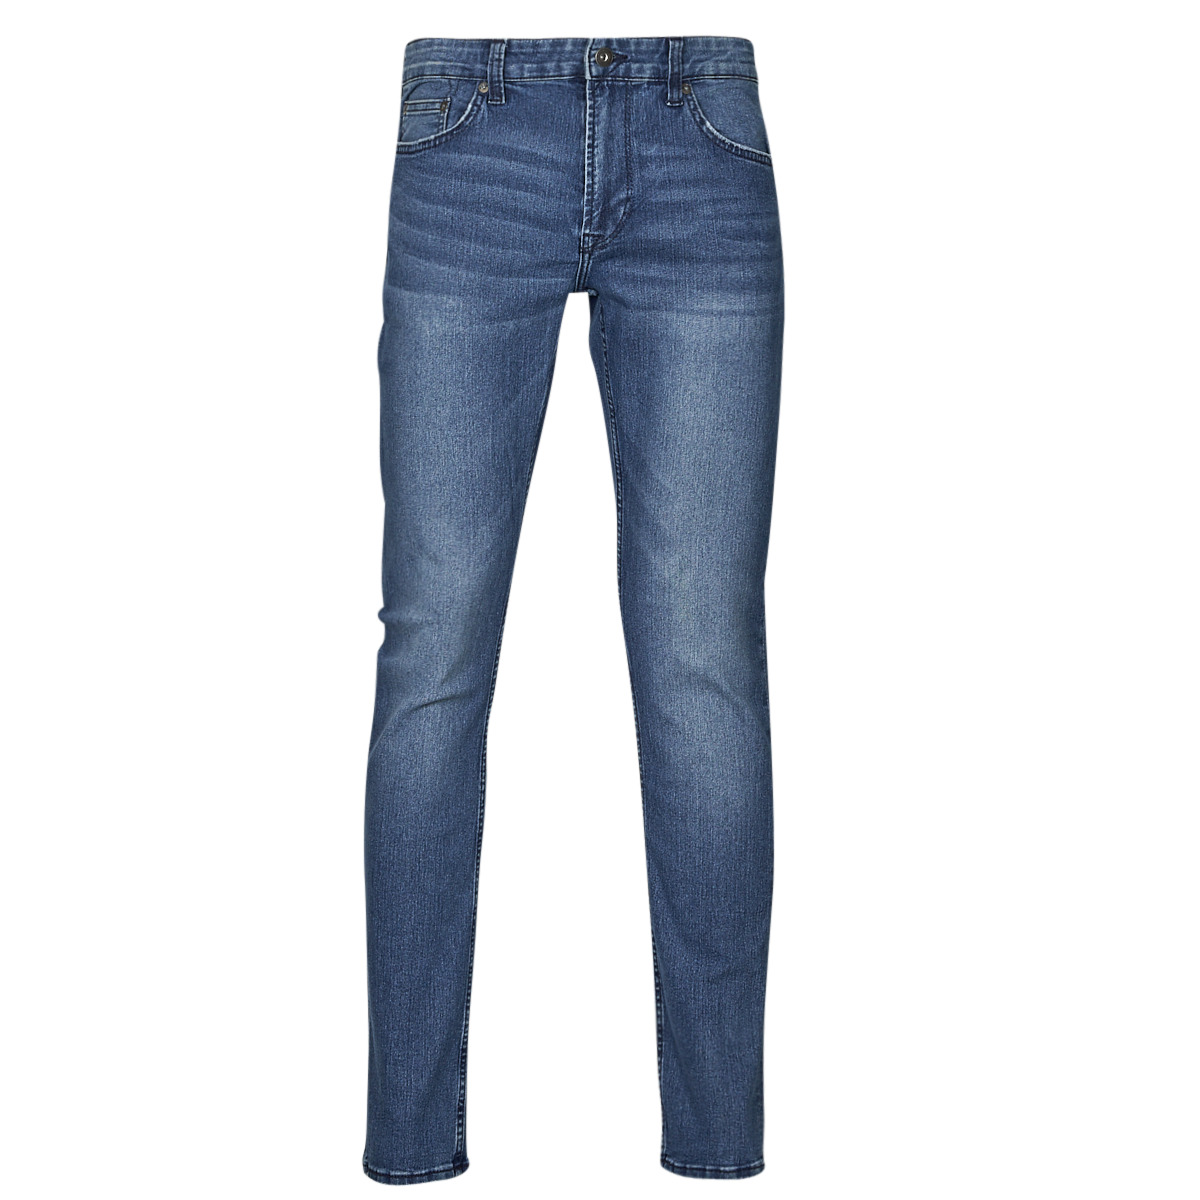 ONLY & SONS ONSLOOM MID. BLUE 4327 DNM JEANS VD Heren Jeans - Maat W32 X L34